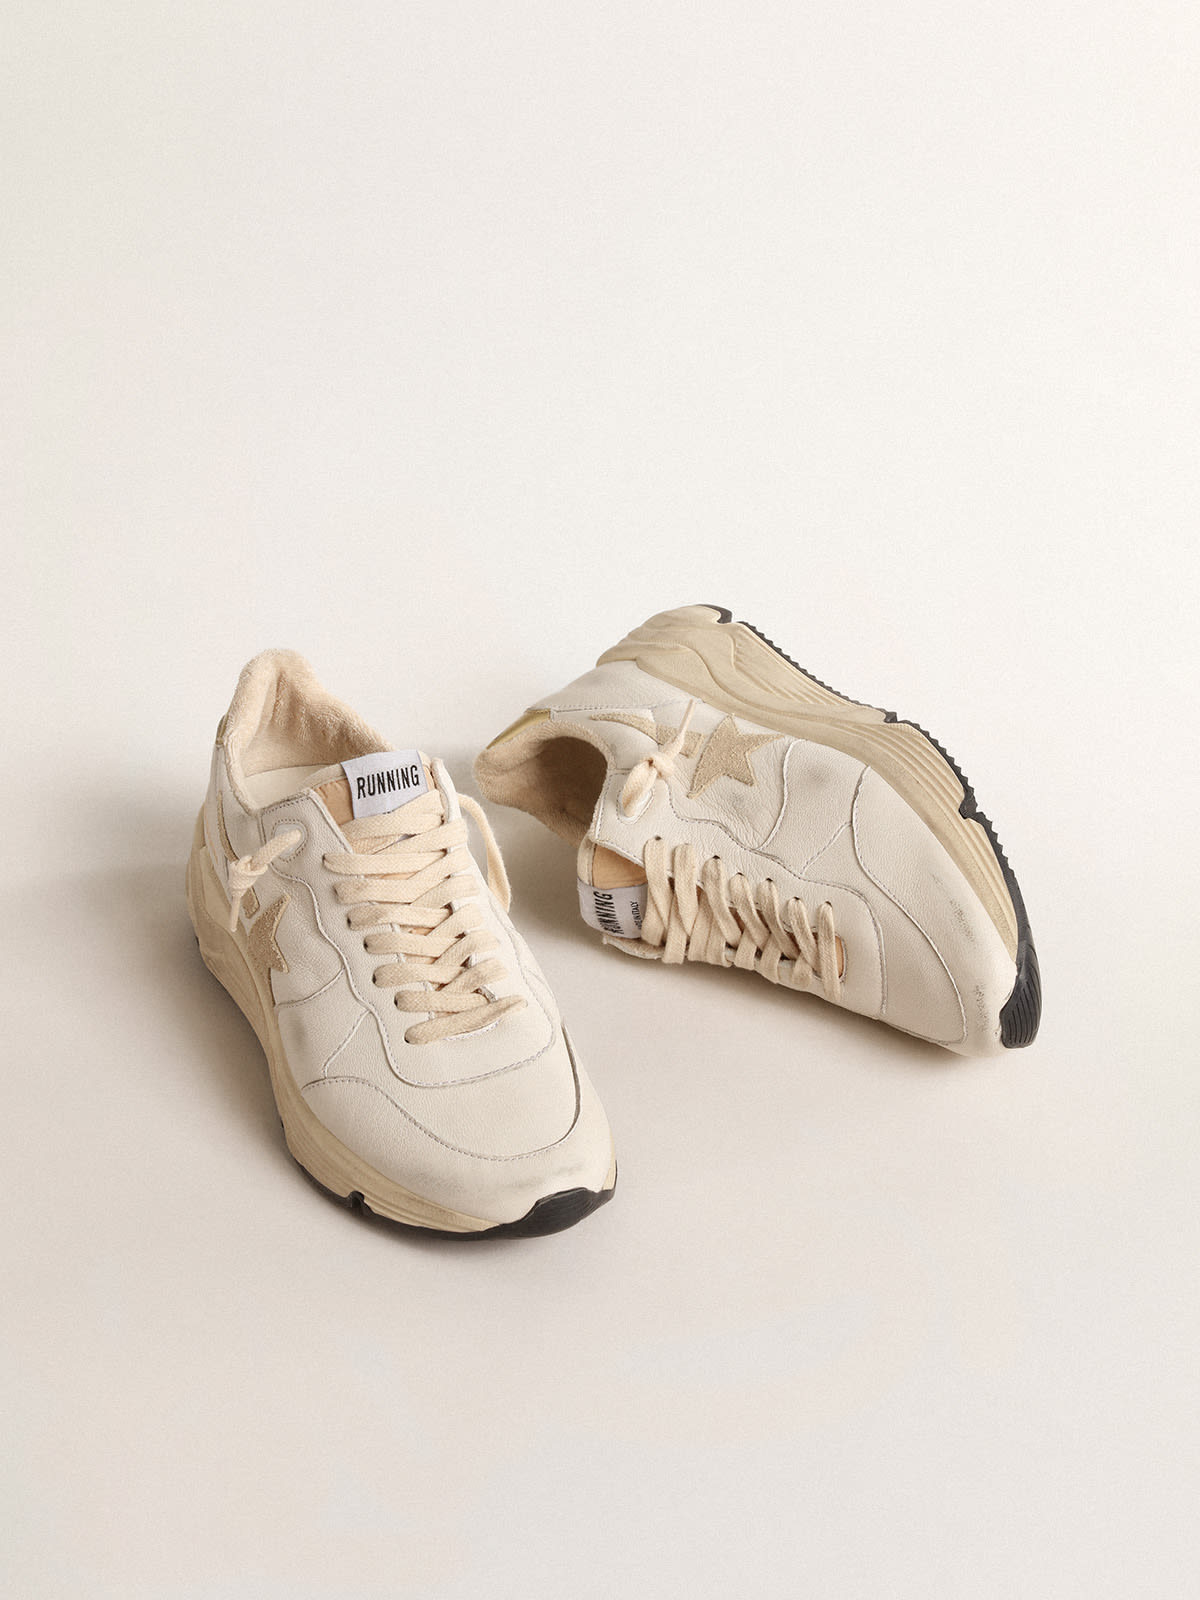 Golden Goose - Running Sole LTD in nappa with suede star and gold heel tab in 